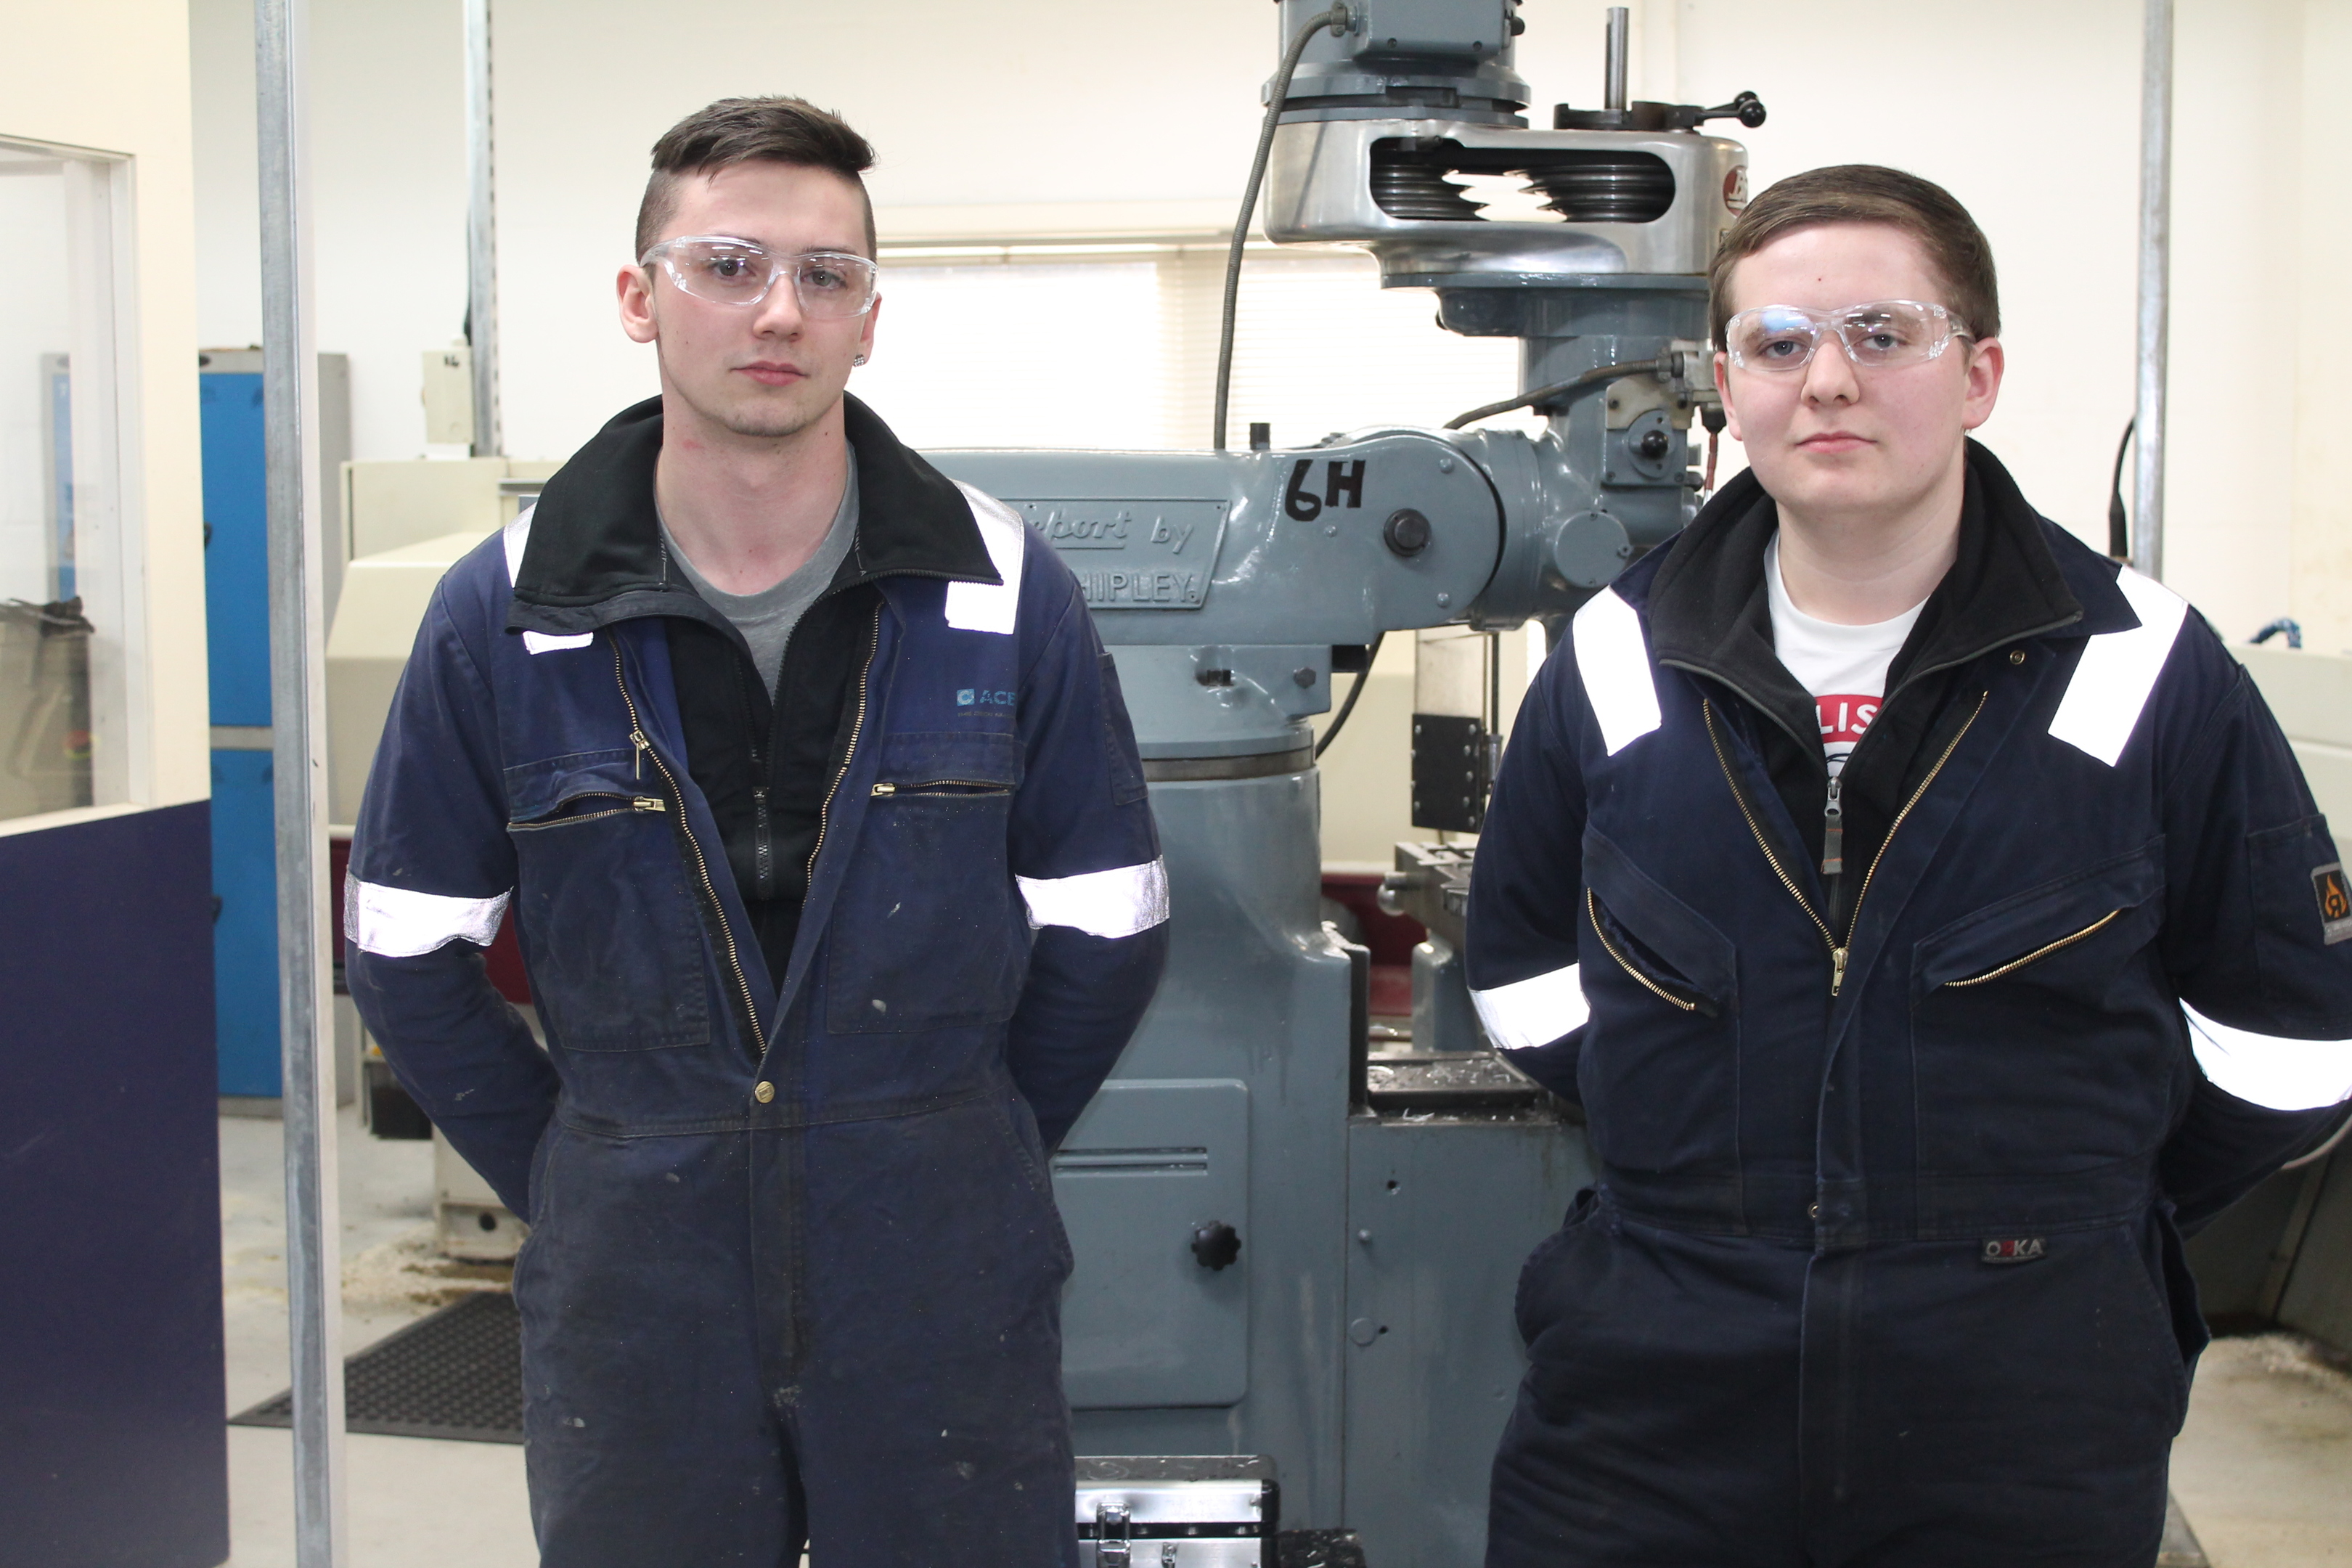 Apprentices are looking for work after being made redundant from Ace Winches